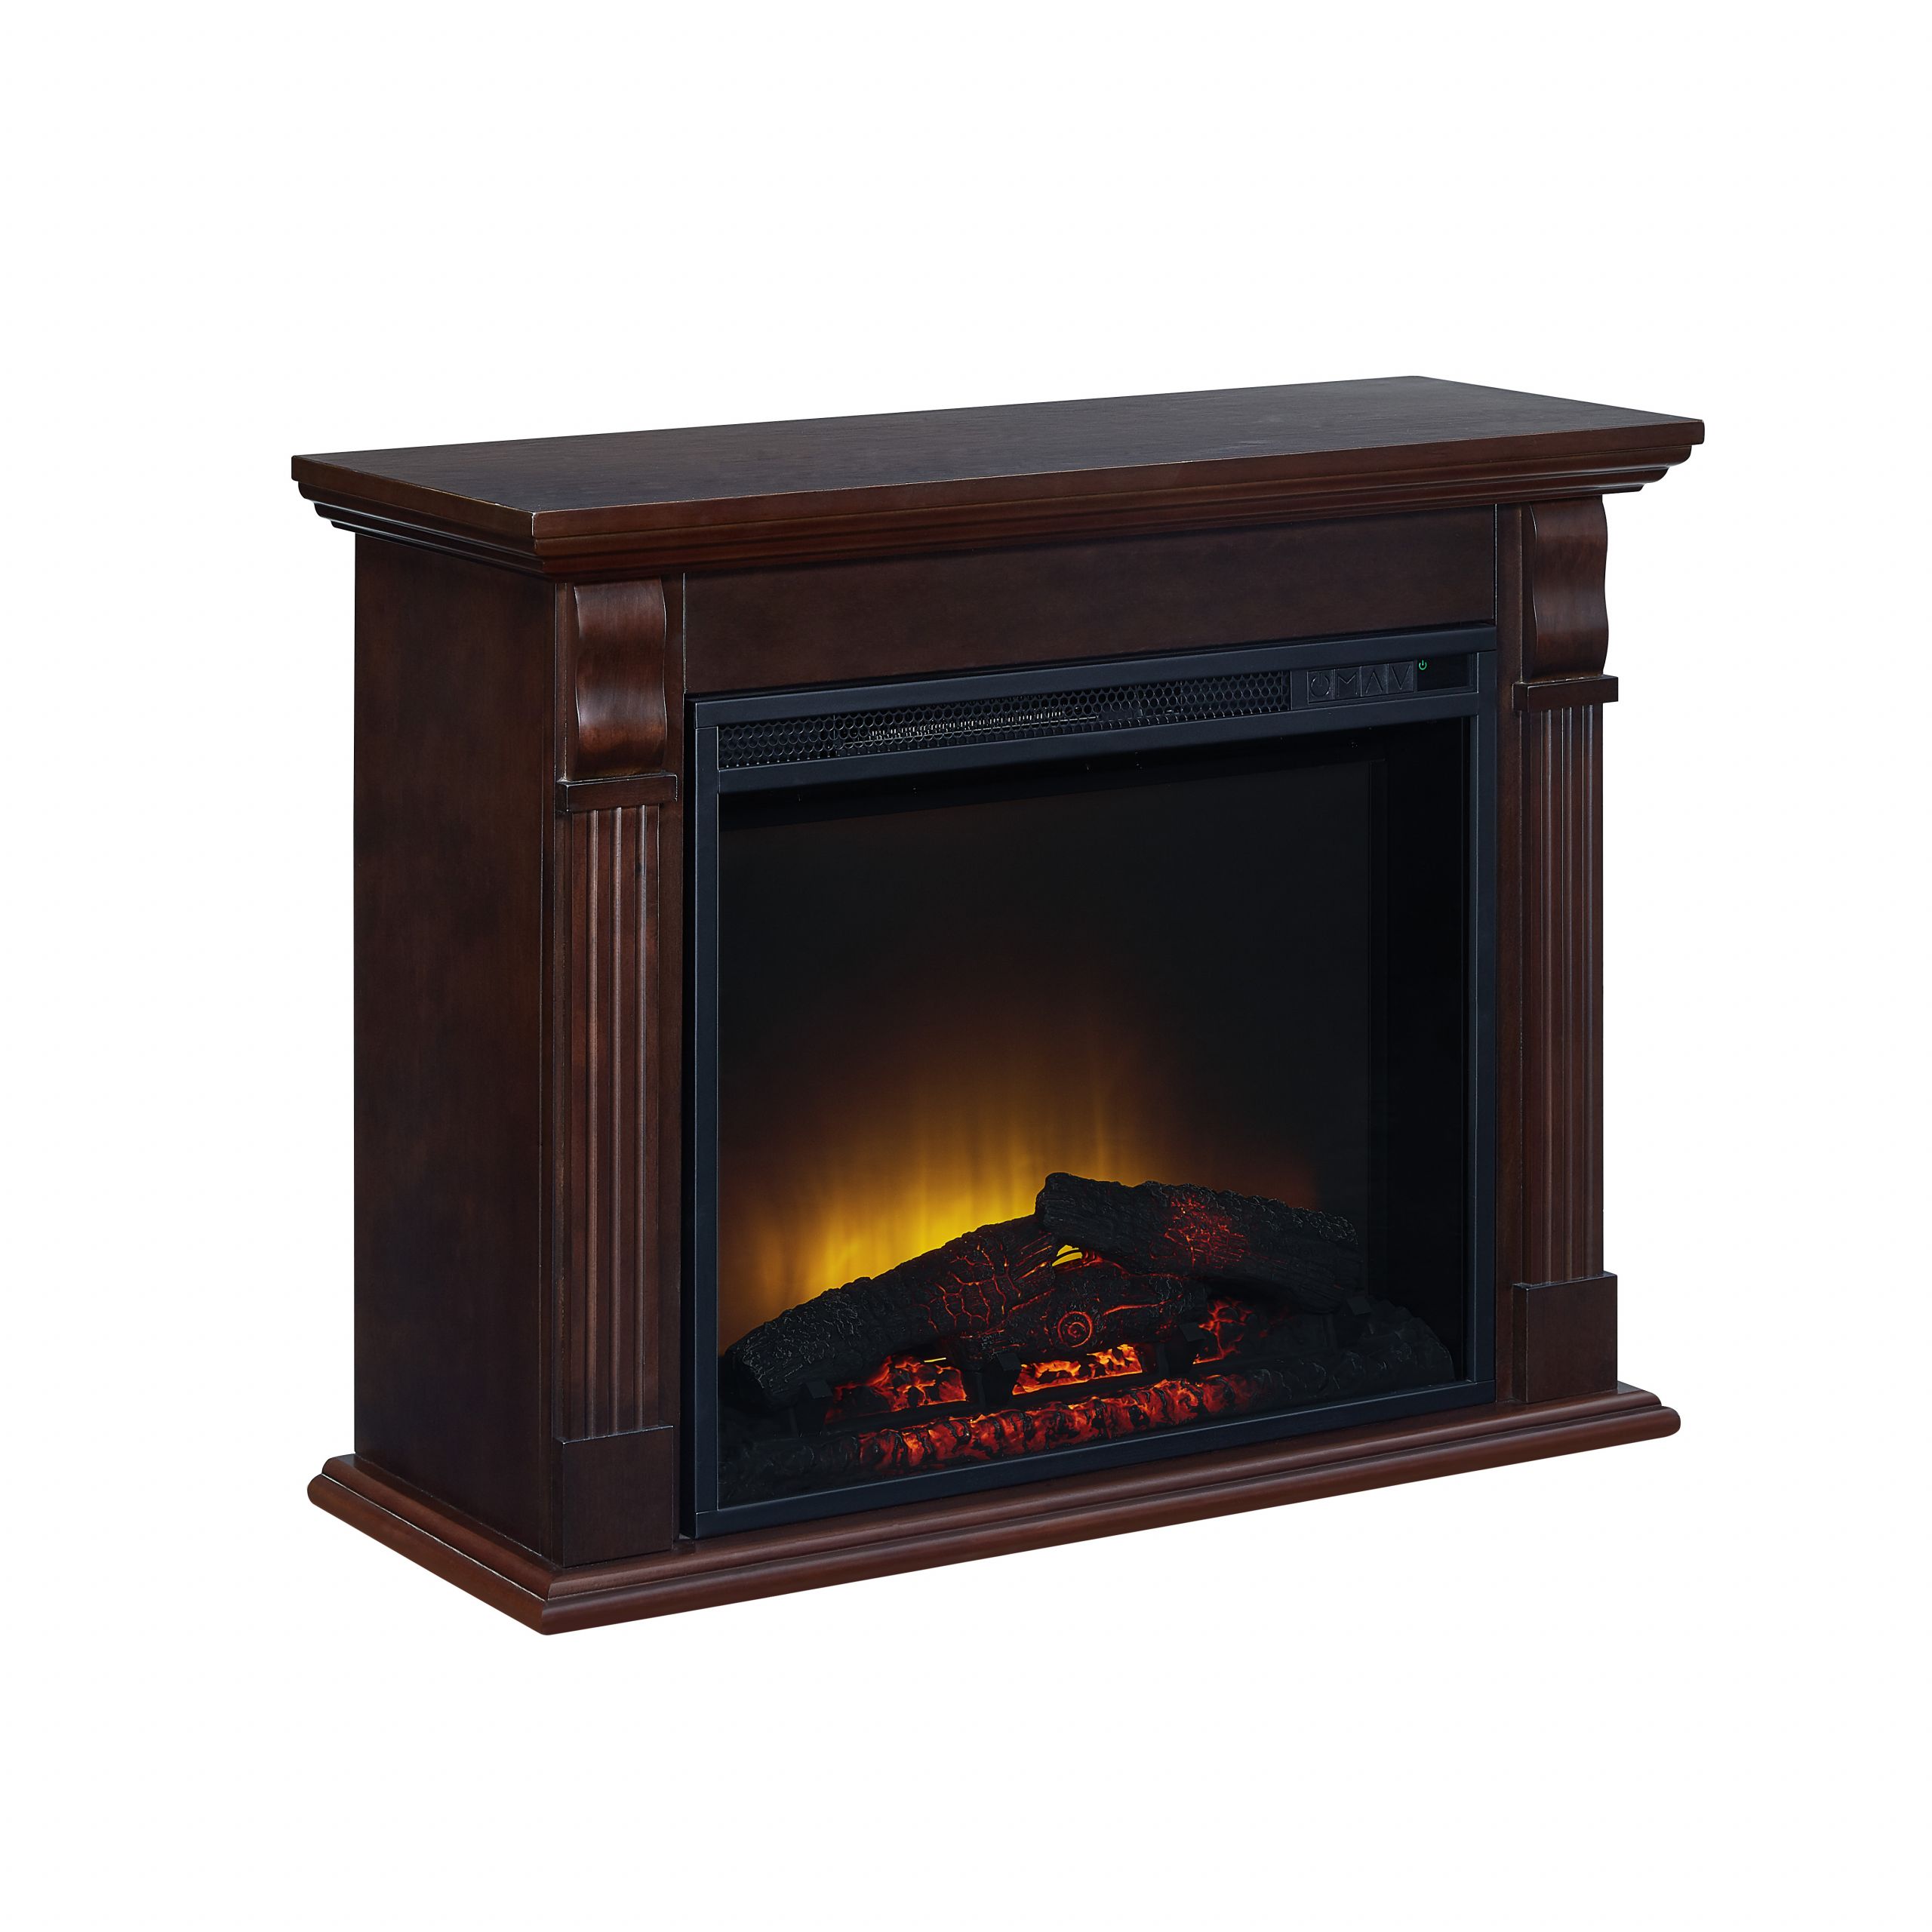 Fireplace Plus San Marcos Awesome Bold Flame 33 46 Inch Electric Fireplace In Chestnut